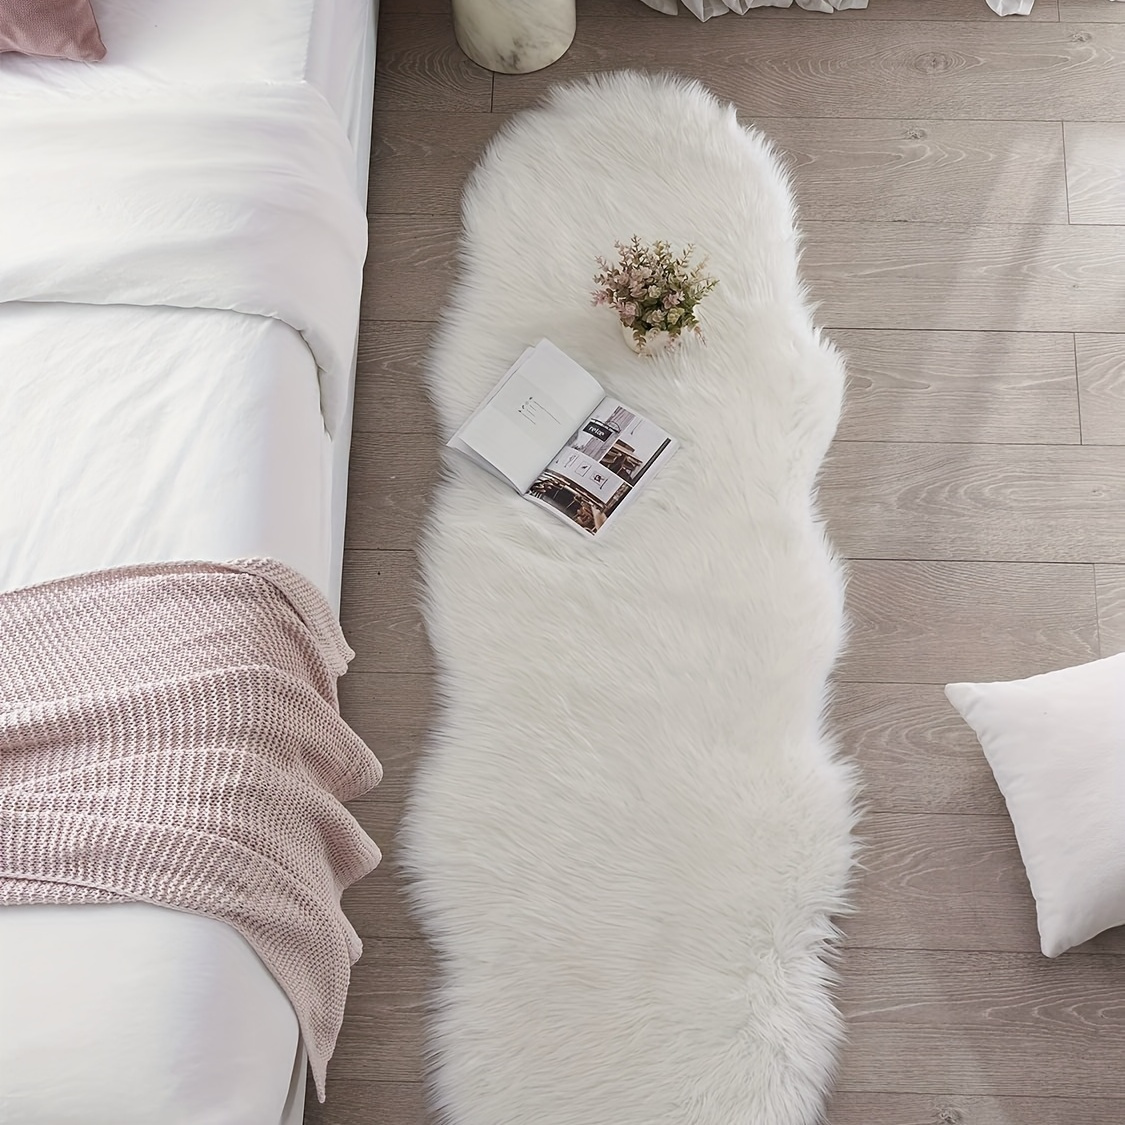 

1pc Faux Fur Shag Area Rugs, Shaggy Area Rugs Ultra Soft Sheepskin Fur Rug, White Fuzzy Rug Machine Washable Shag Rug For Living Room Bedroom Bedside, Throw Rugs For Home Deocr, Room Decor